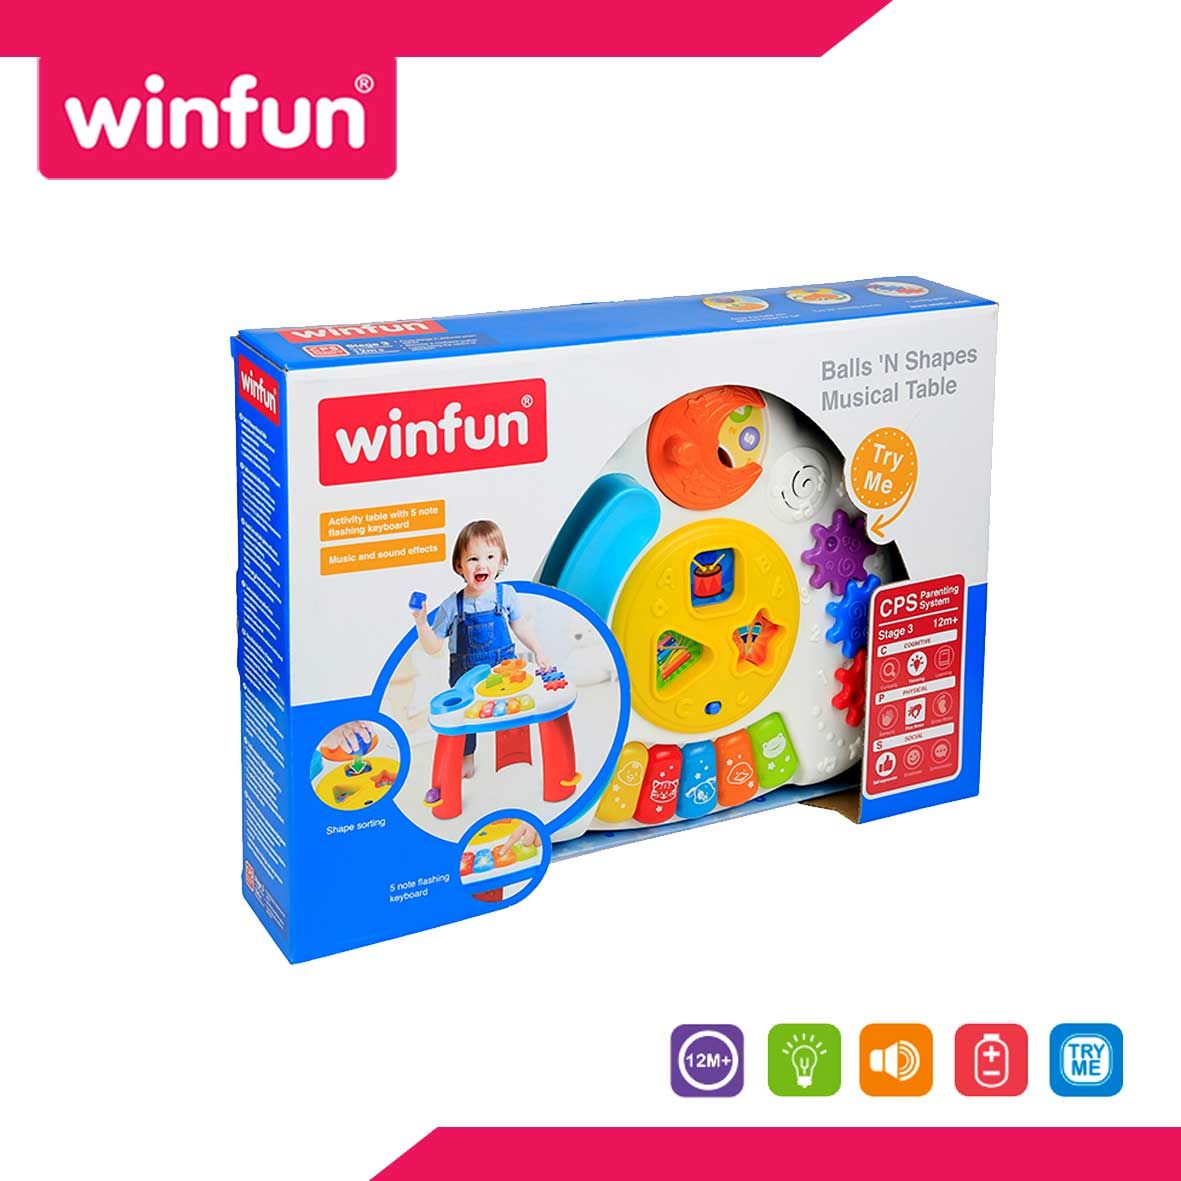 Winfun Ball 'n Shapes Musical Table - 1